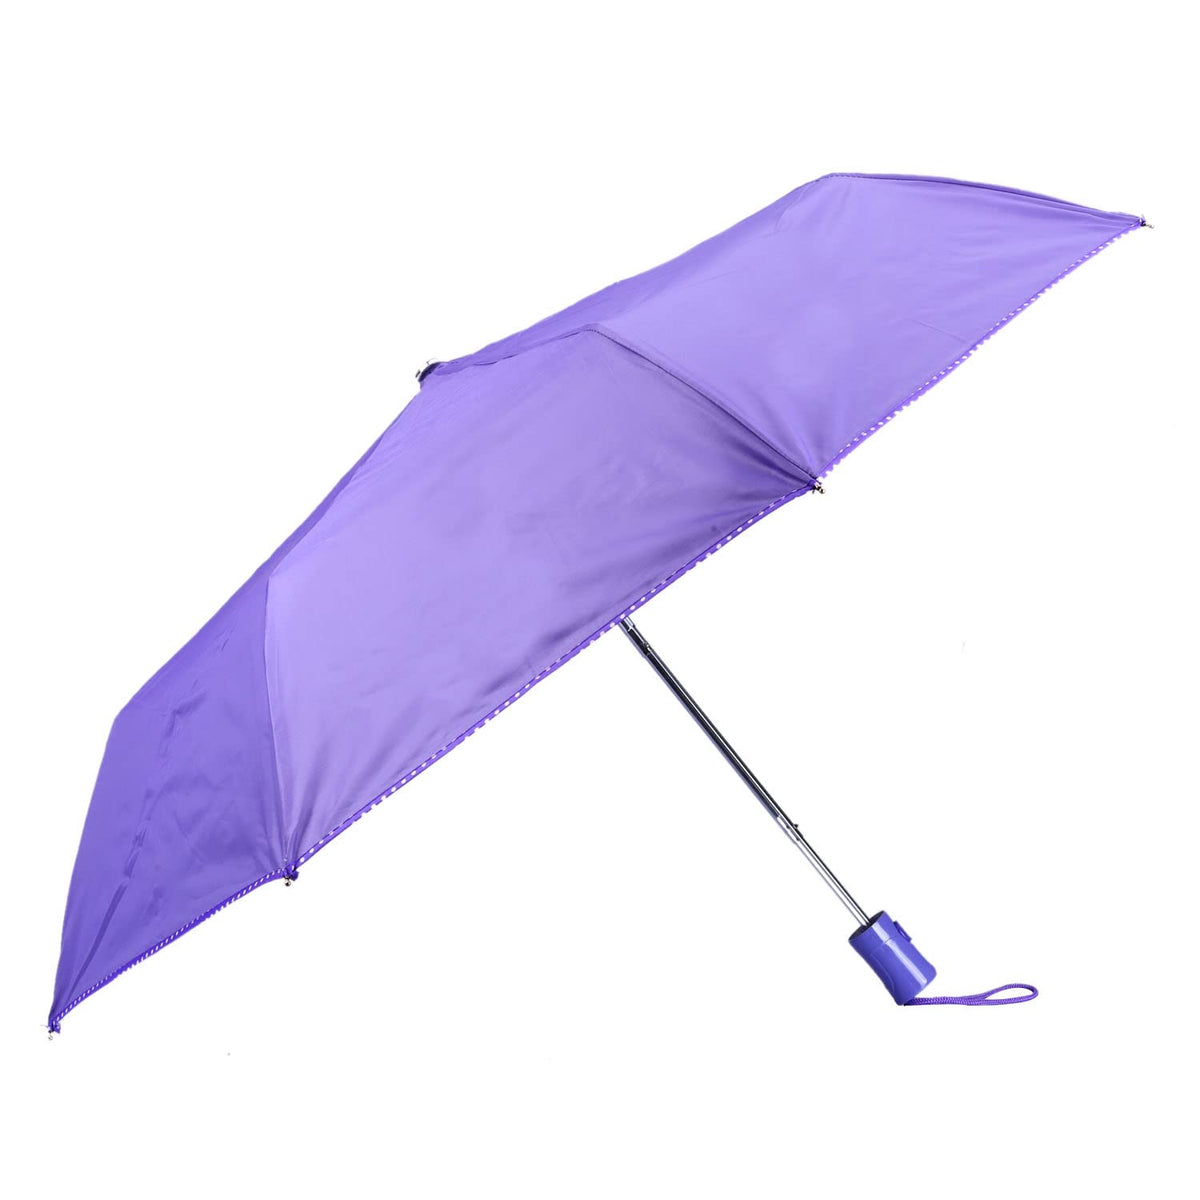 THE CLOWNFISH Umbrella Monochrome Series 3 Fold Auto Open Waterproof Water Repellent 190 T Polyester Double Coated Silver Lined Dotted Border Umbrellas For Men and Women (Purple)